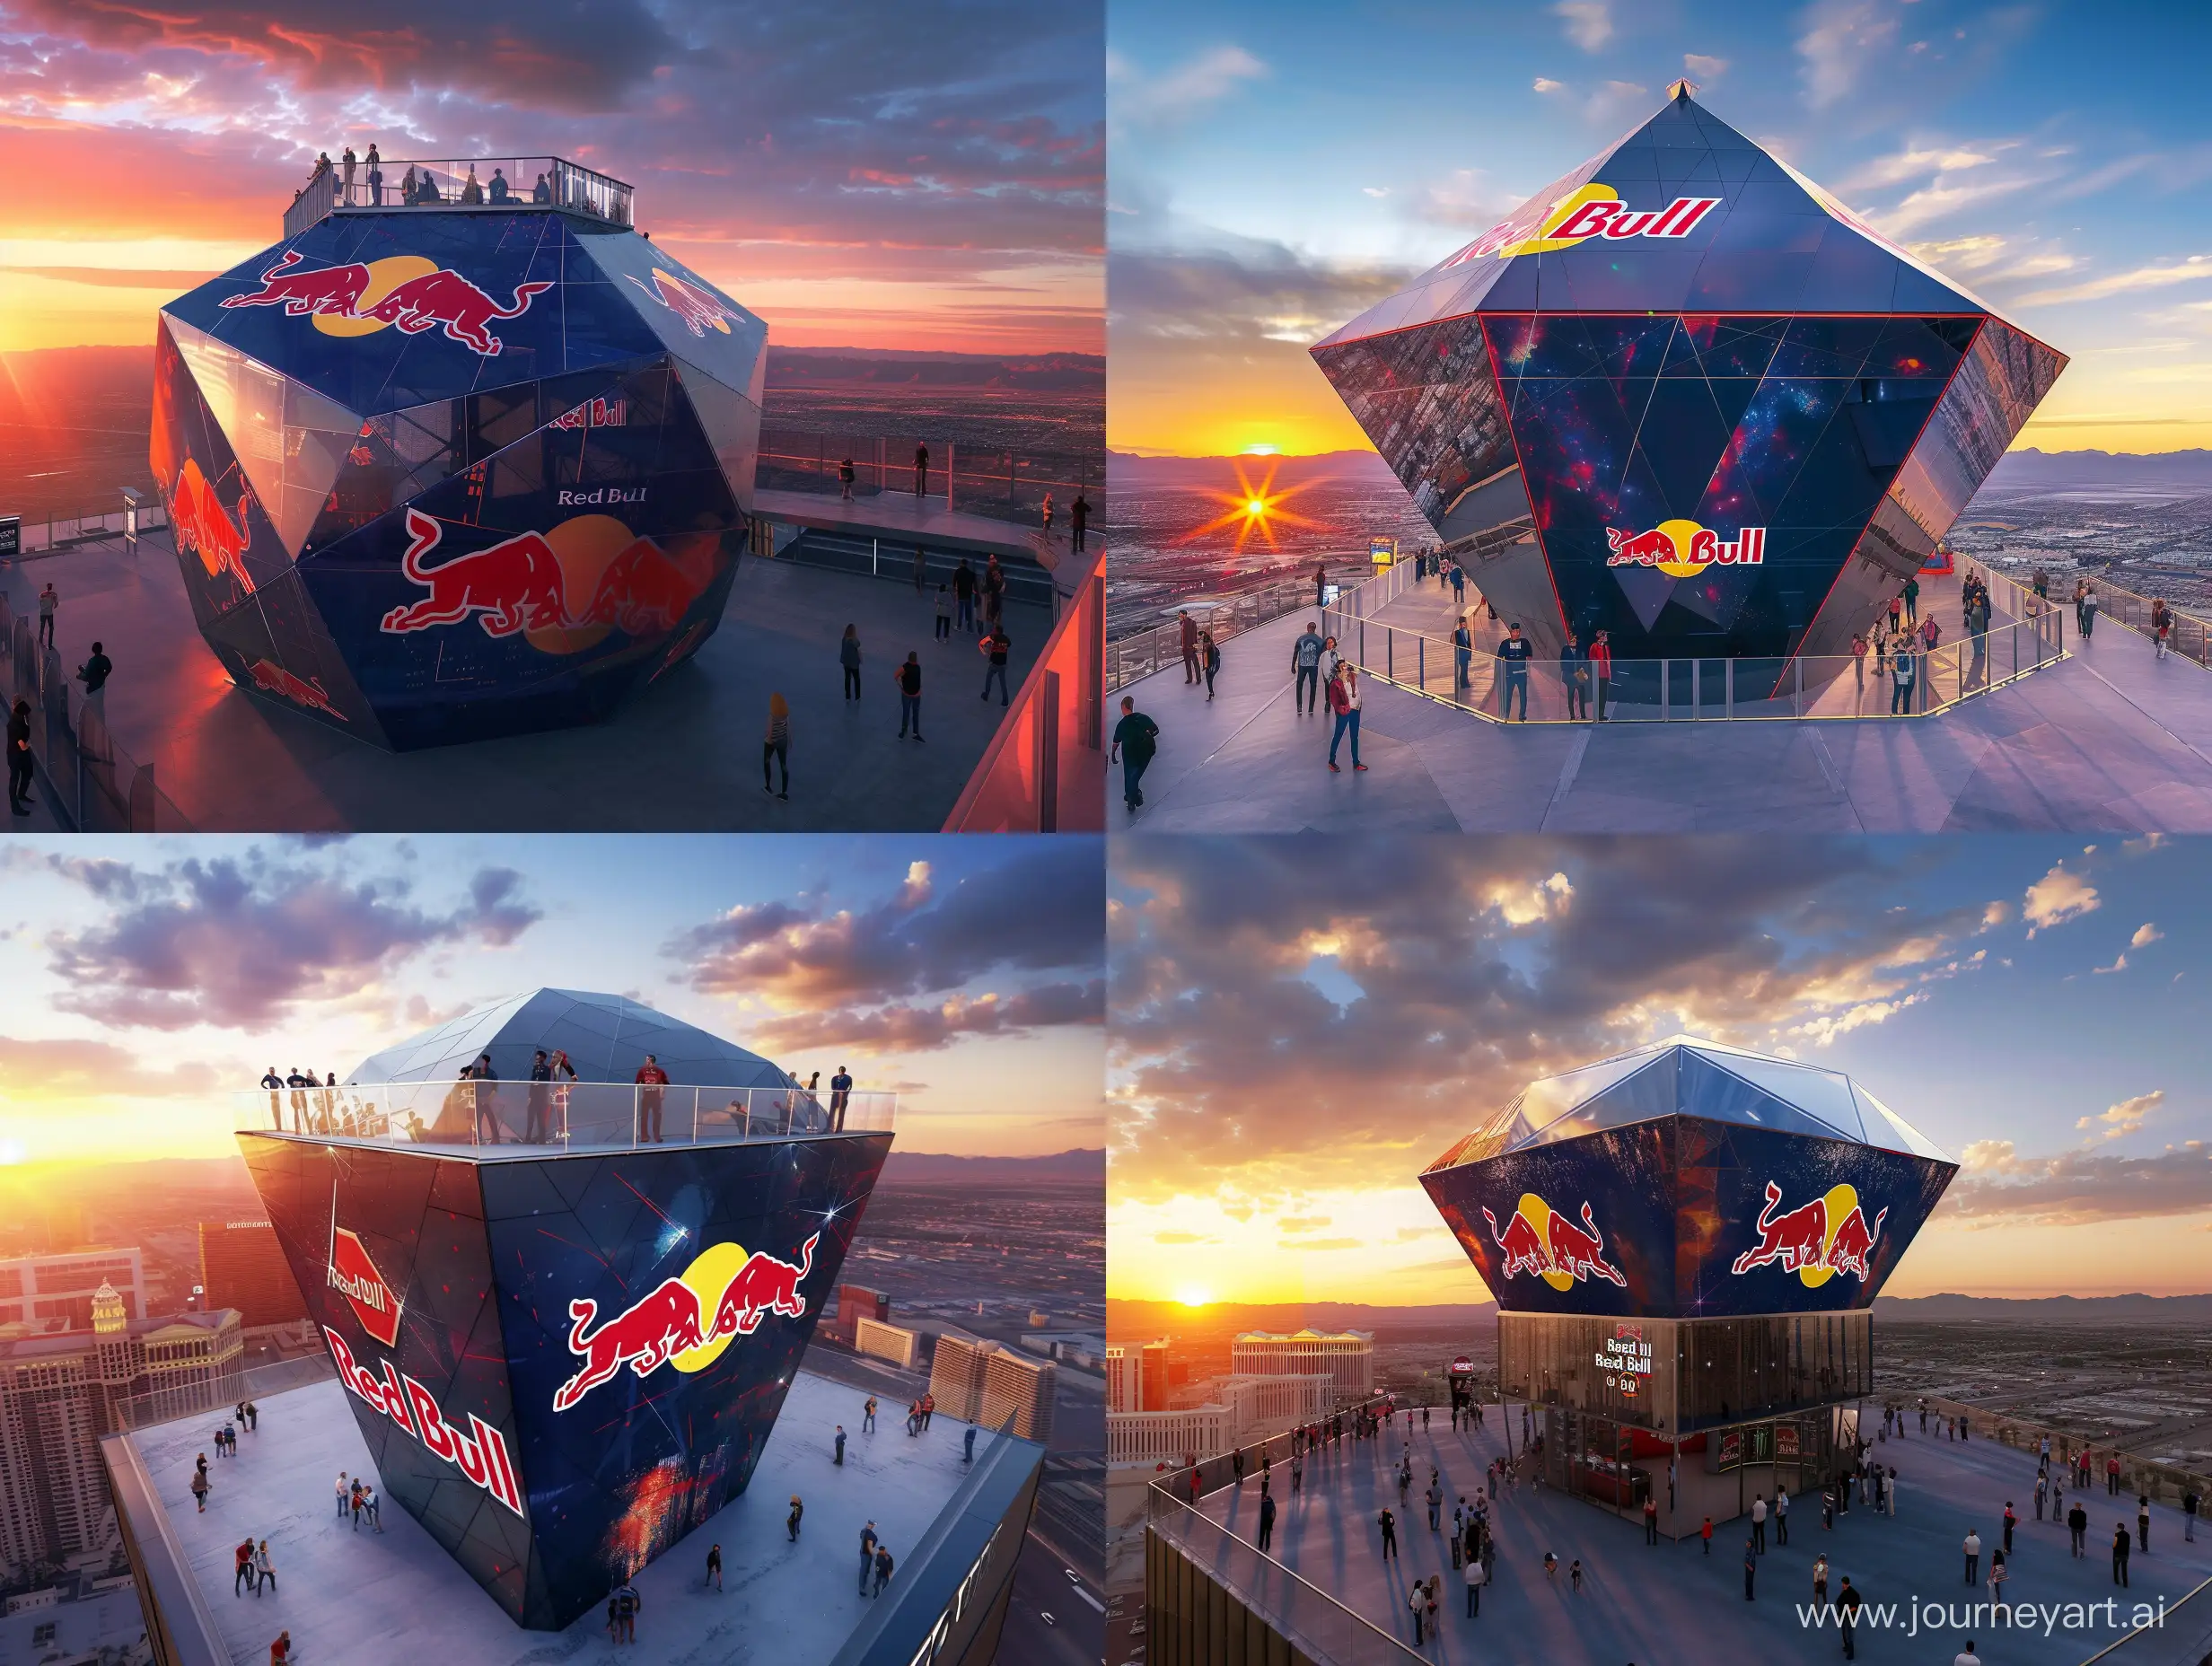 Red-Bull-Square-Building-with-Rhombus-Roof-at-Sunset